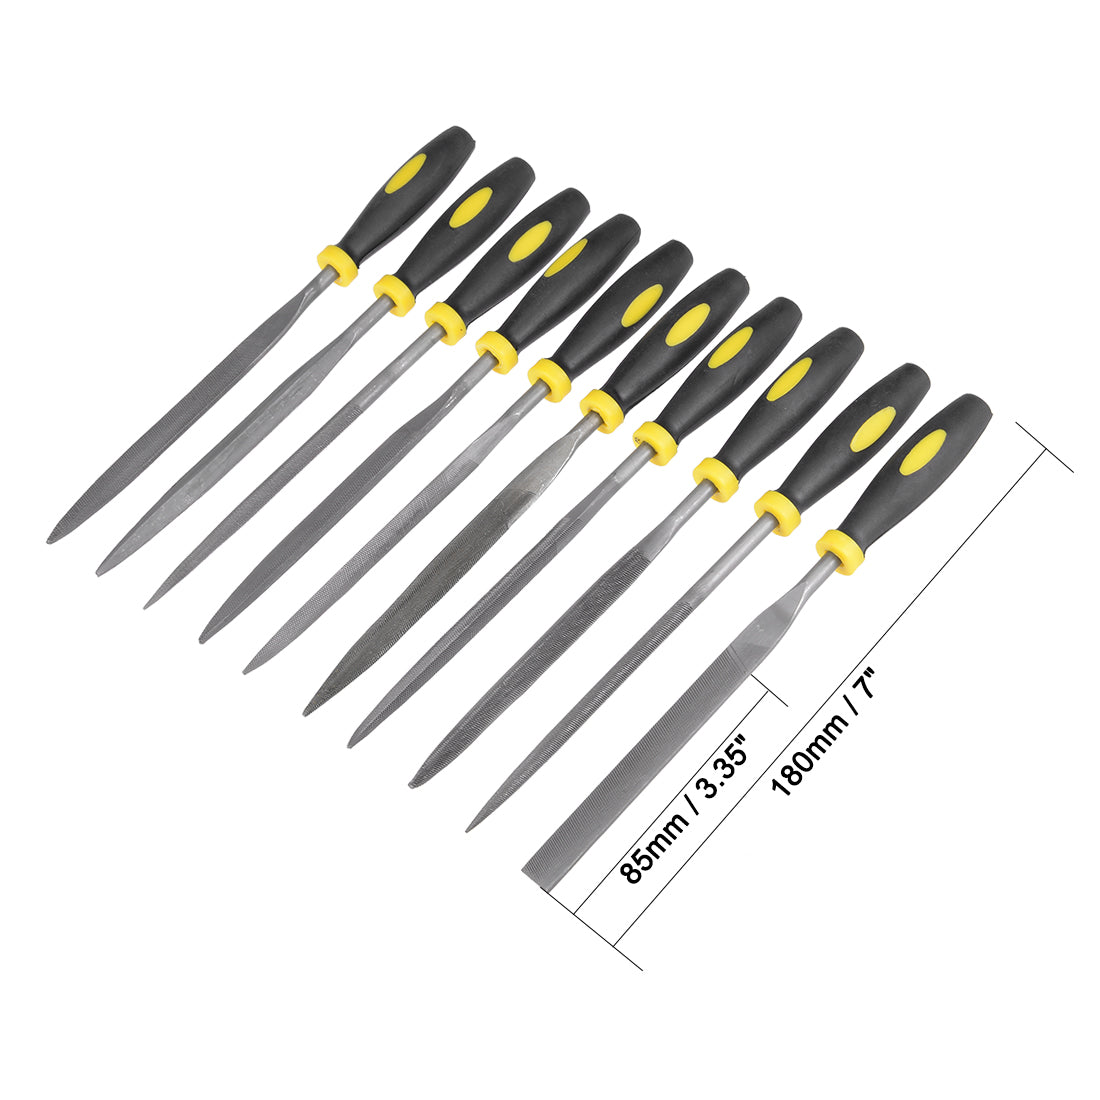 uxcell Uxcell 10Pcs Smooth Cut Bearing Steel Needle File Set with Rubber Handle, 5mm x 180mm